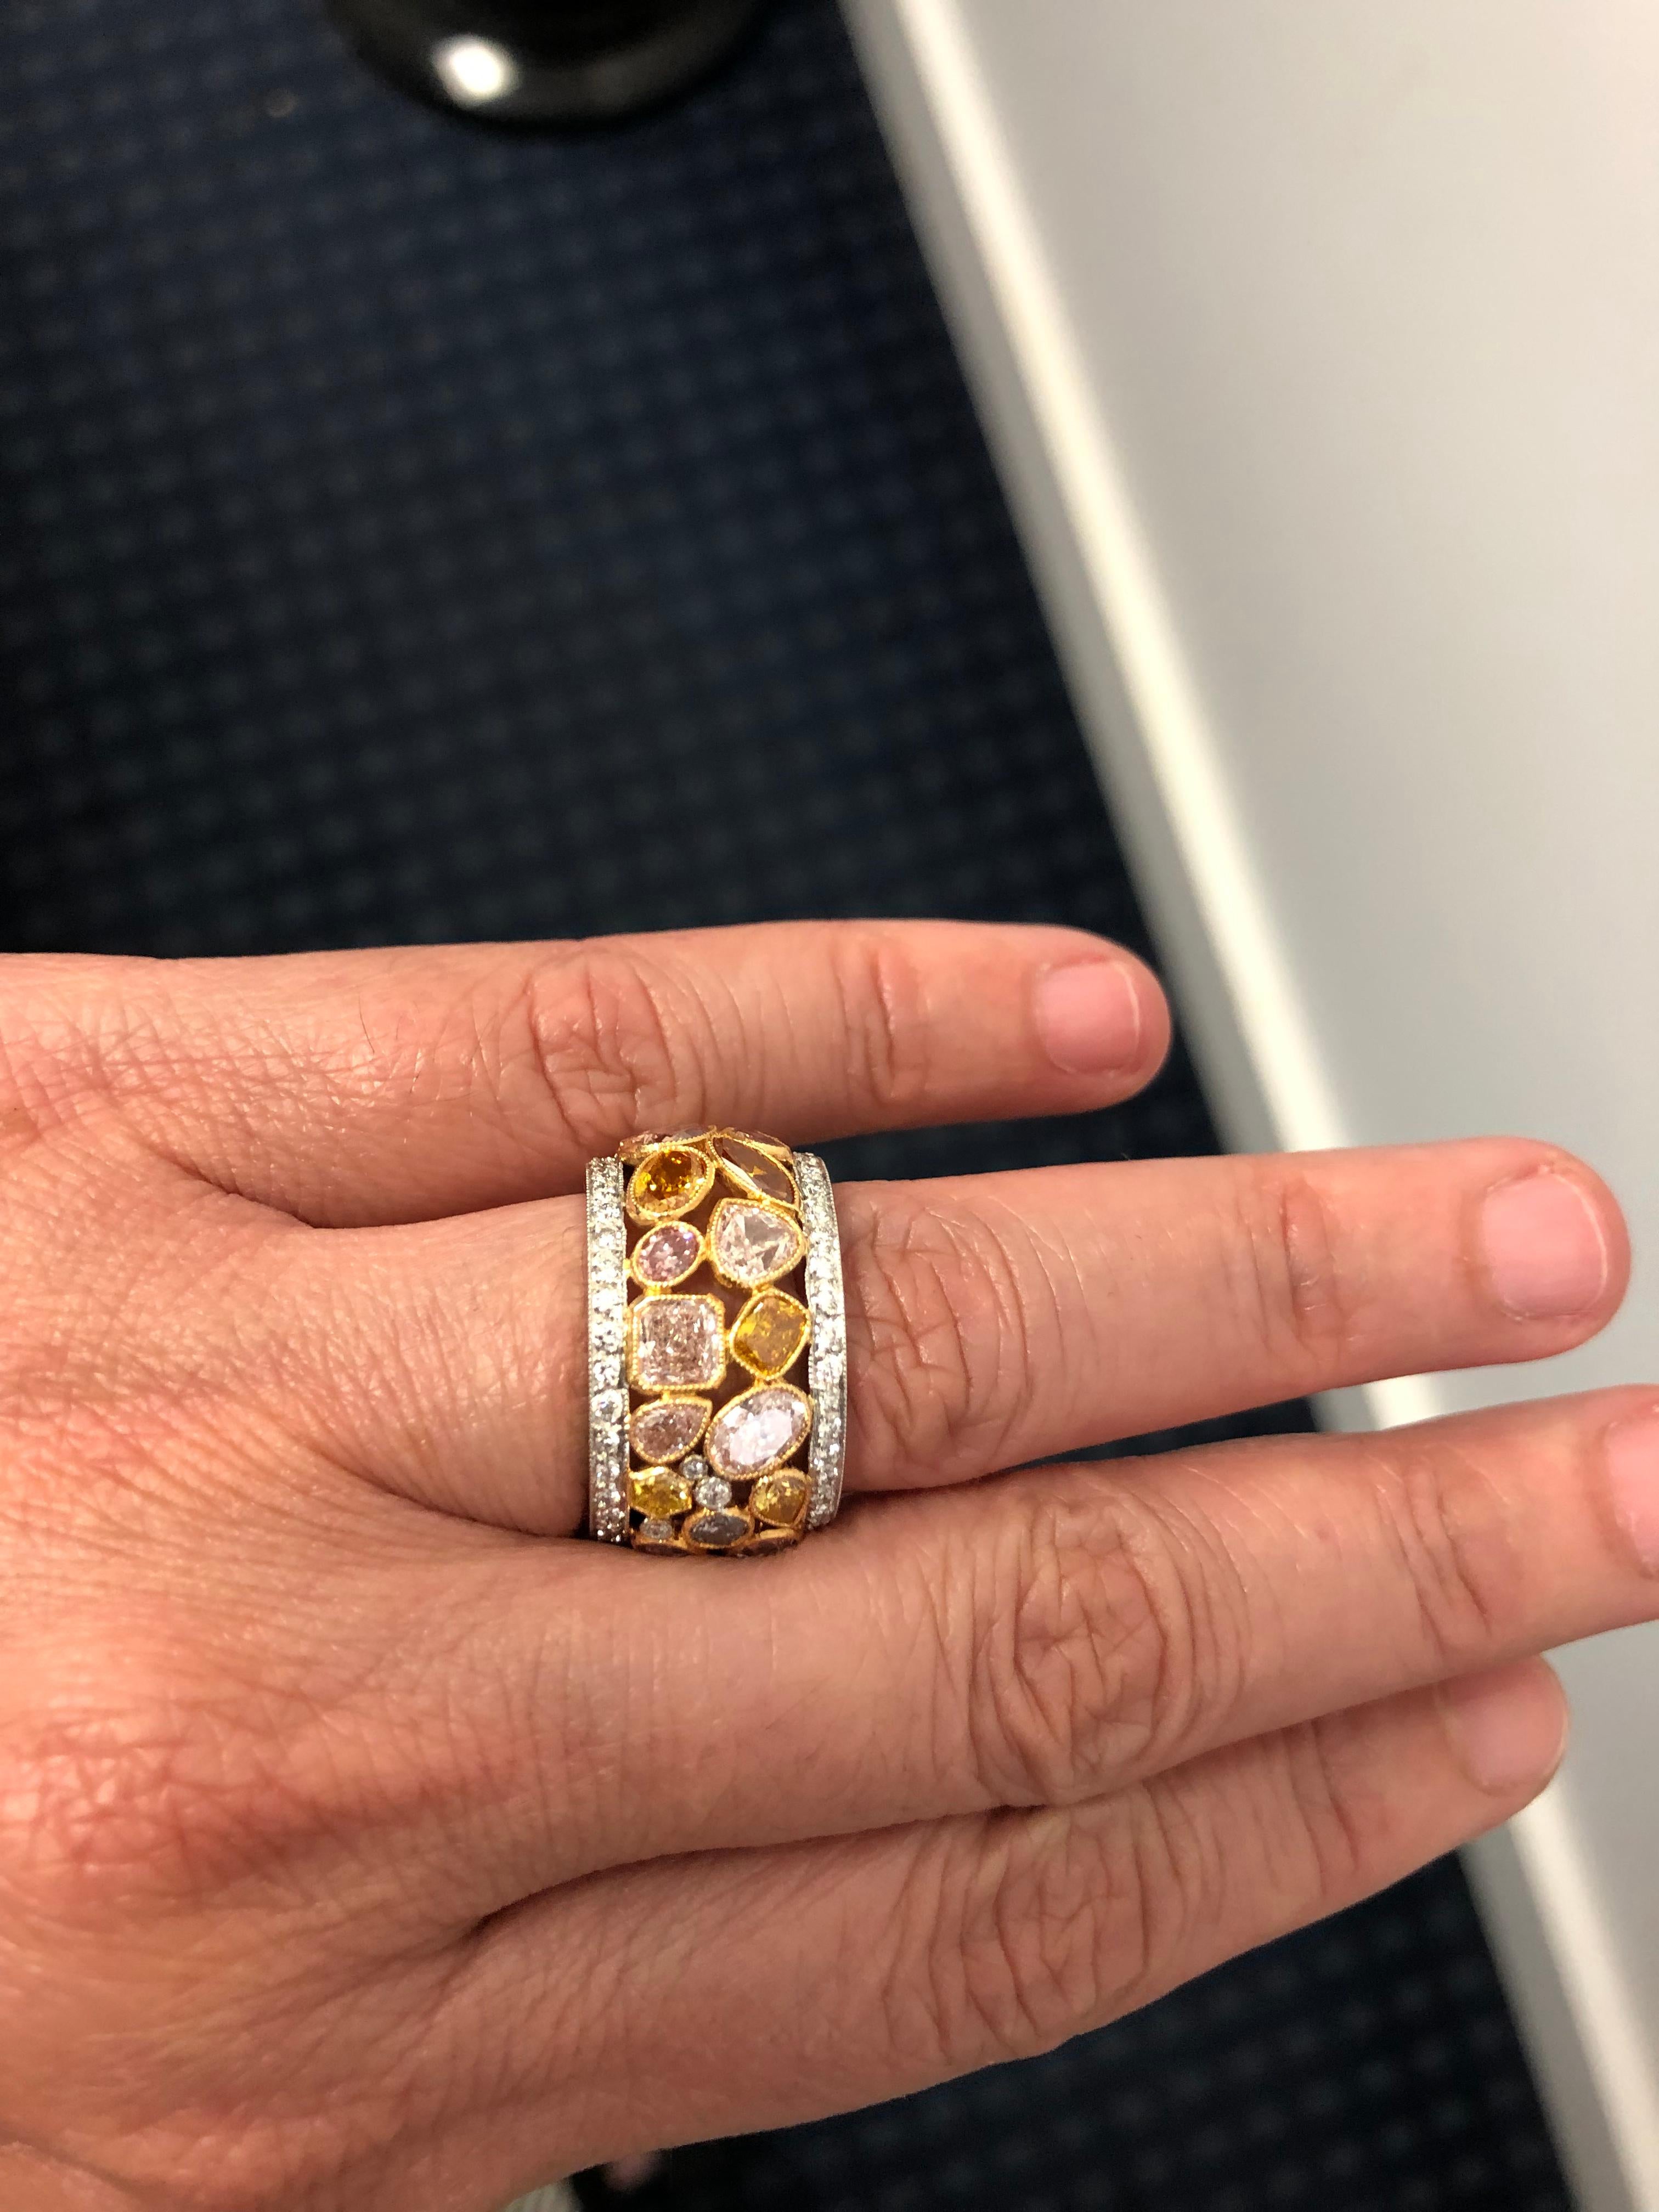 Modern white and fancy multi-colored diamond wedding band ring mounted in 18k and platinum, ring size 6.
Fancy diamond weighing approx. 7.75 cts.
white diamonds weighing approx.  0.84 cts.
ring size 6
Condition: Good - Previously owned and gently